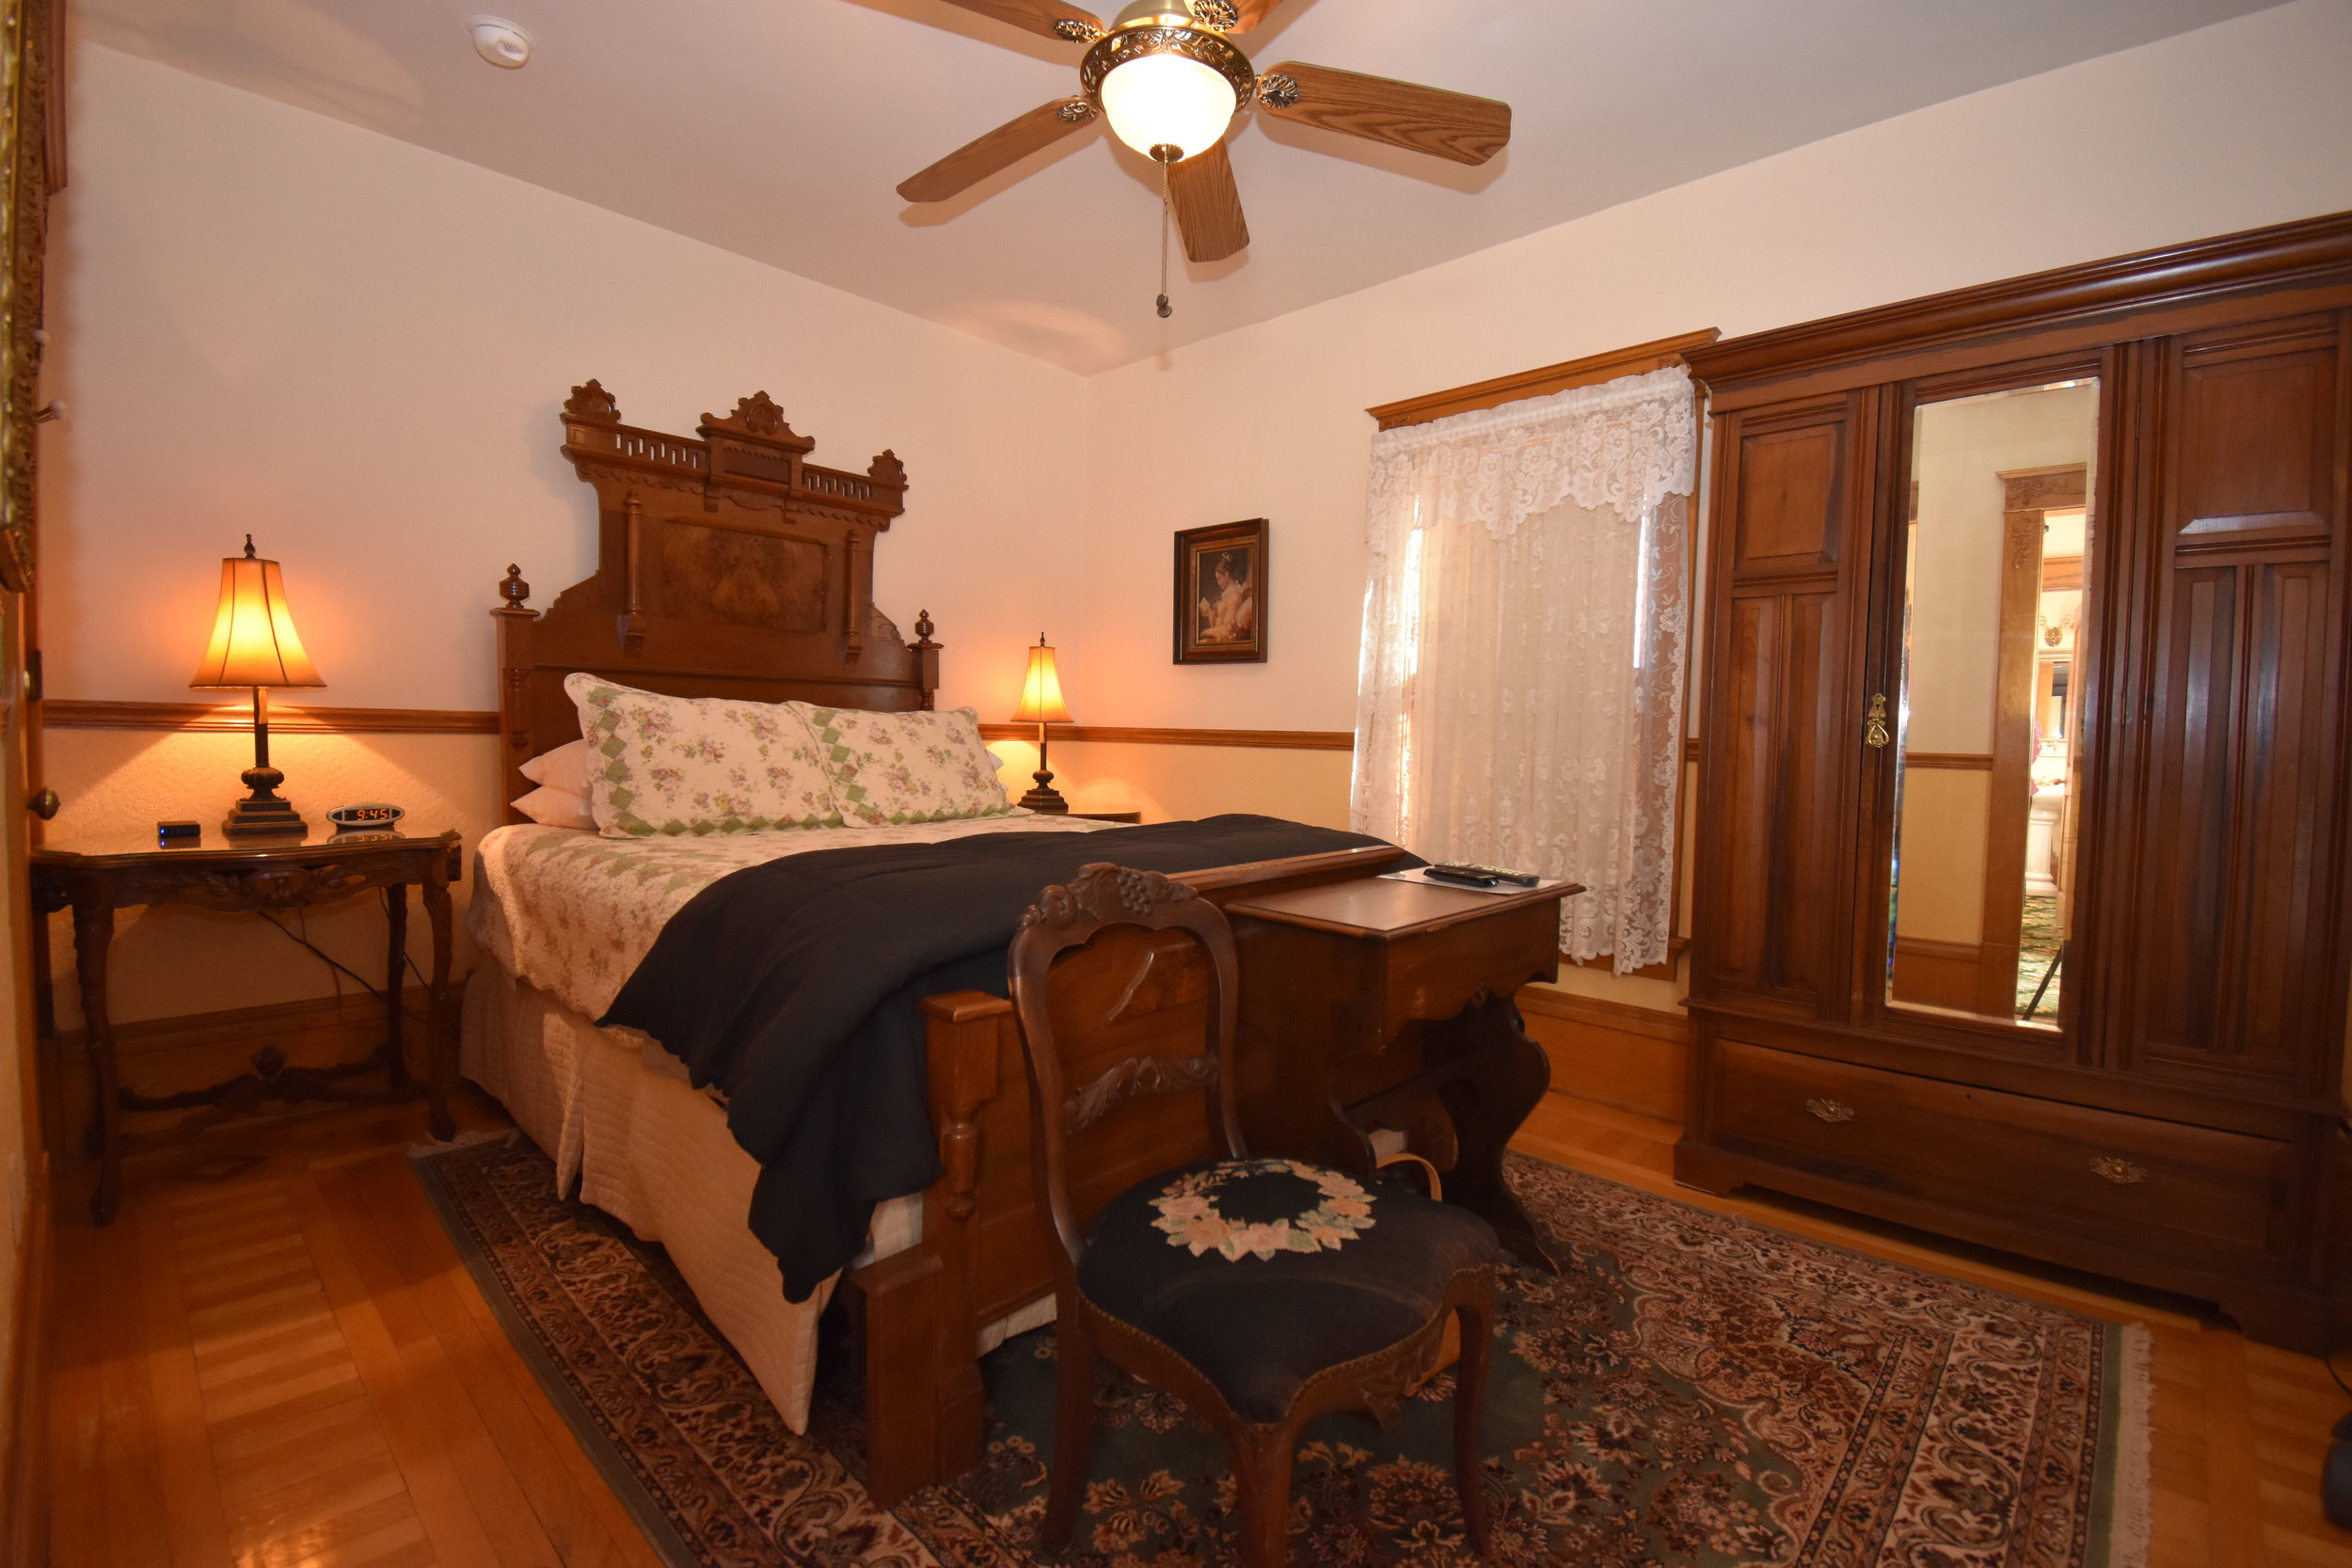 Queen size bed with armoire